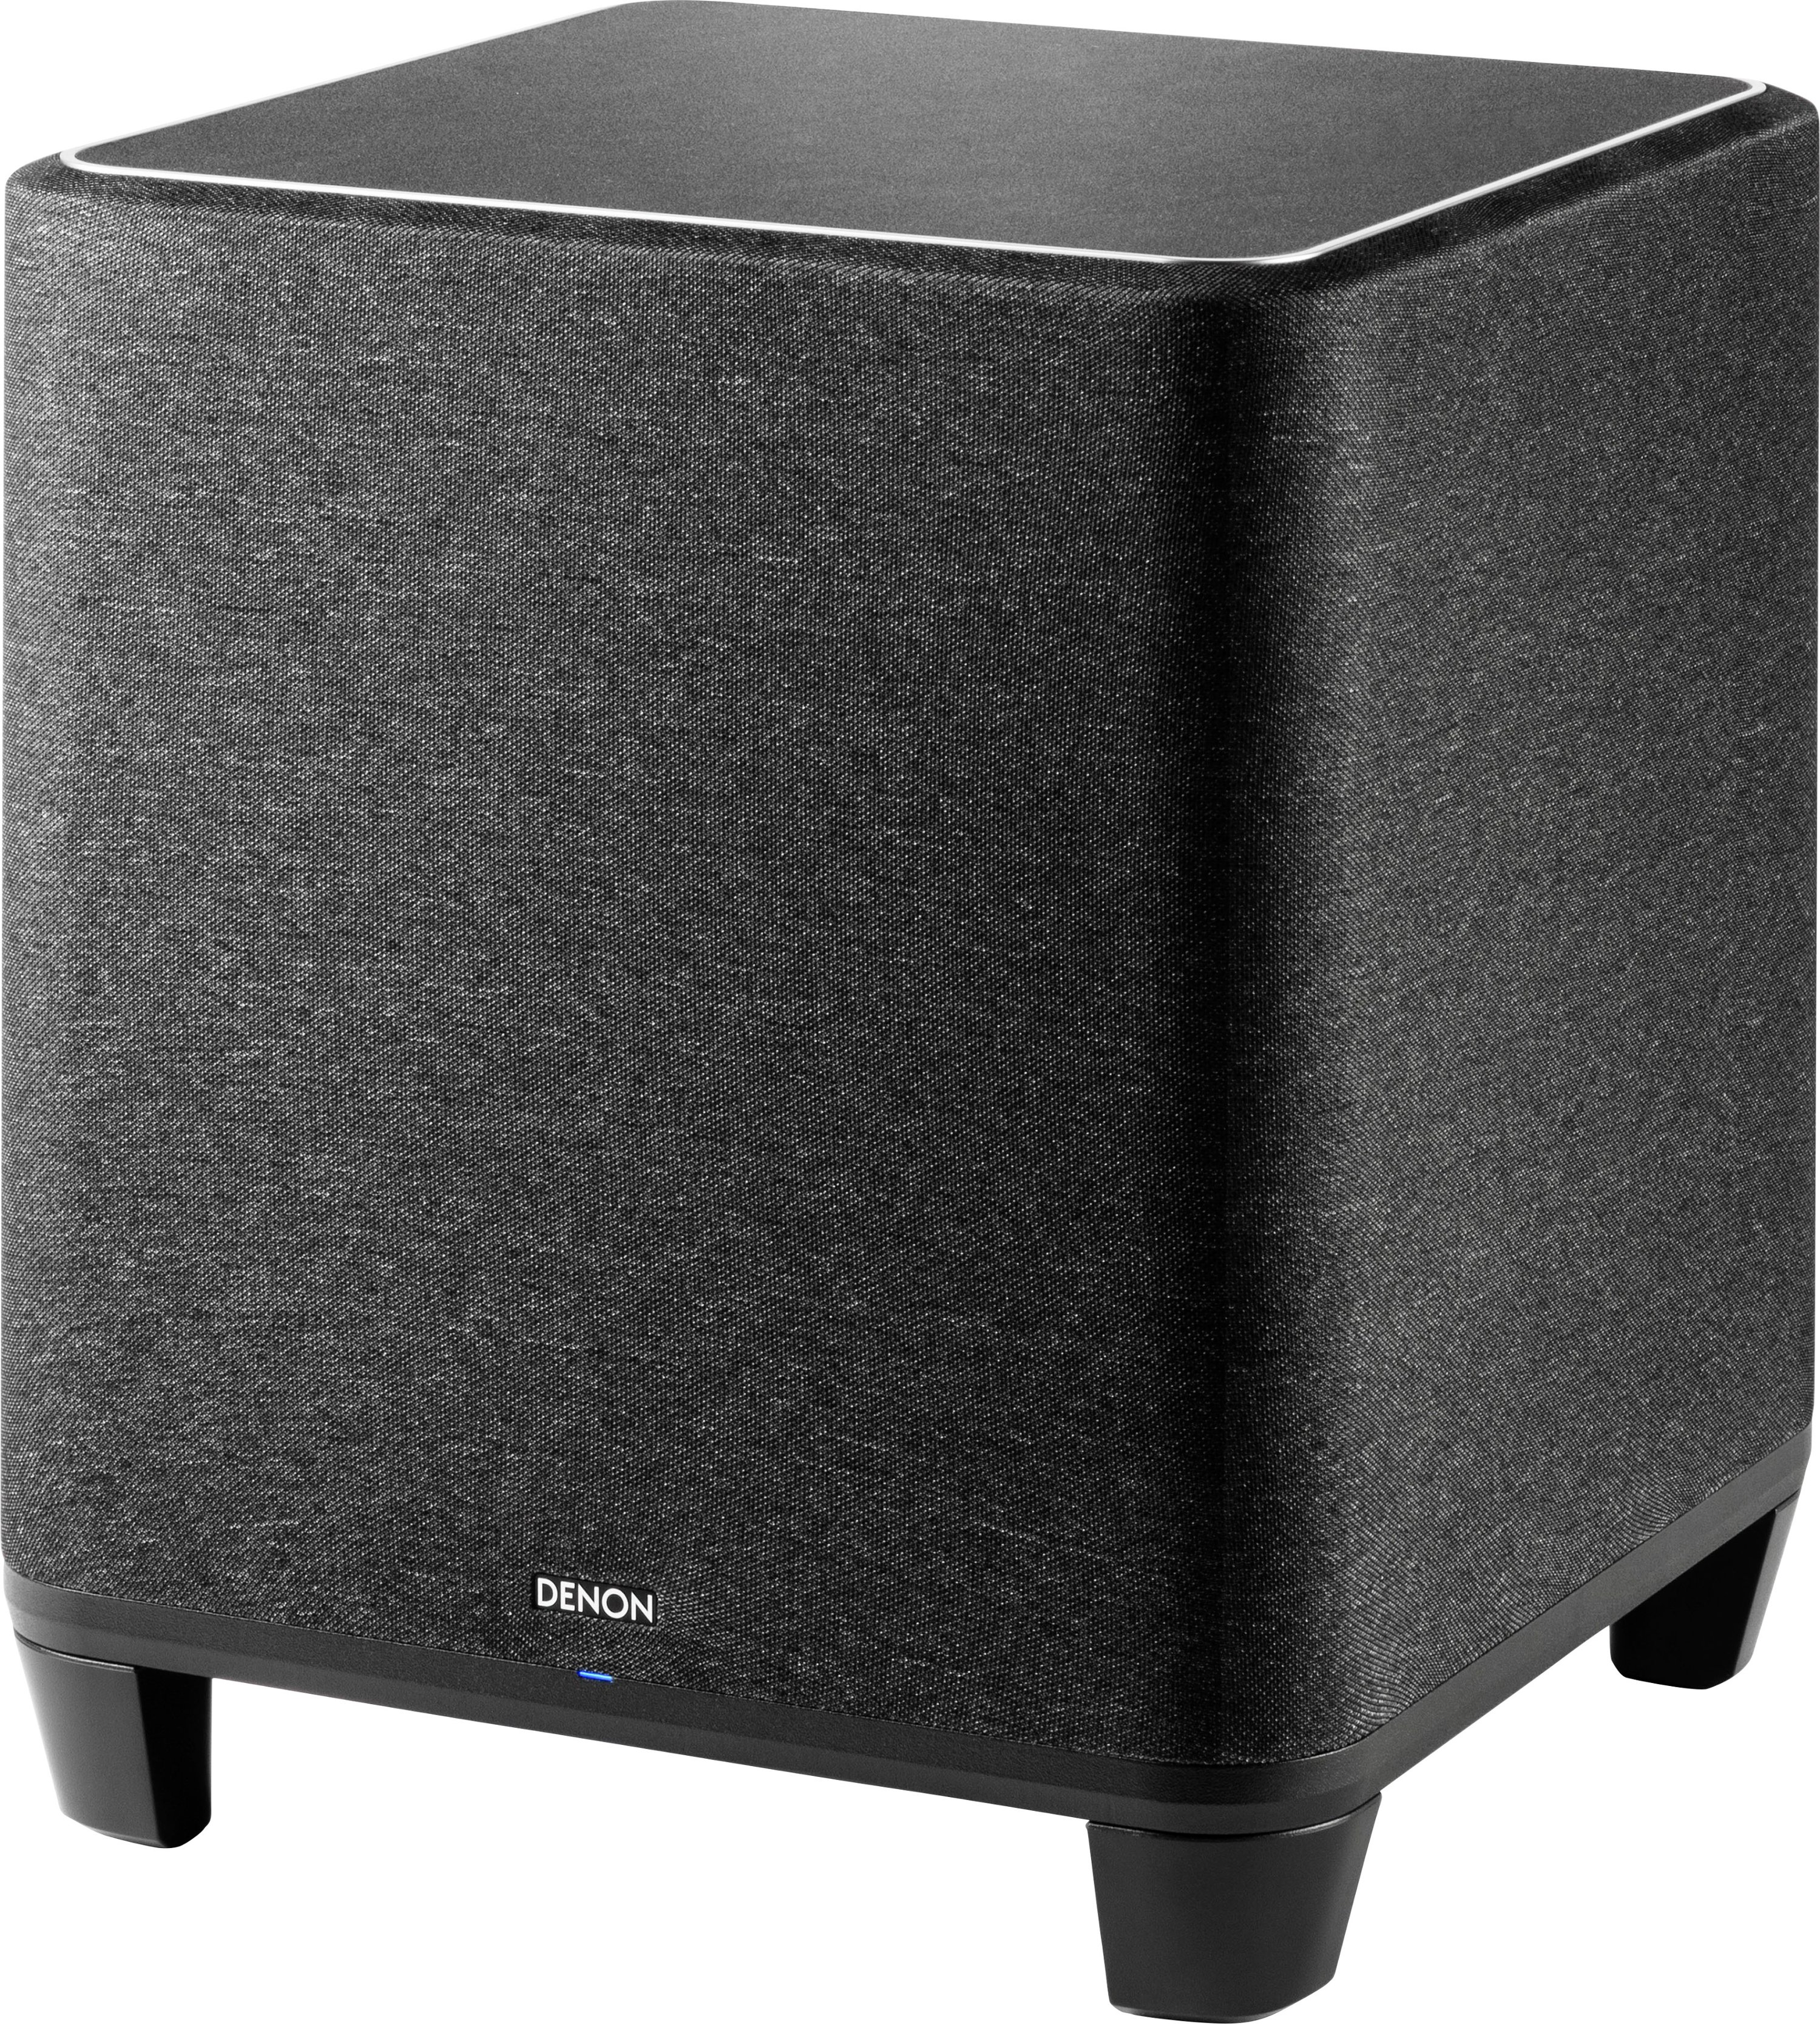 Denon Home Buy HEOS Built-in Best Black DENONHOMESUB Subwoofer - with Wireless